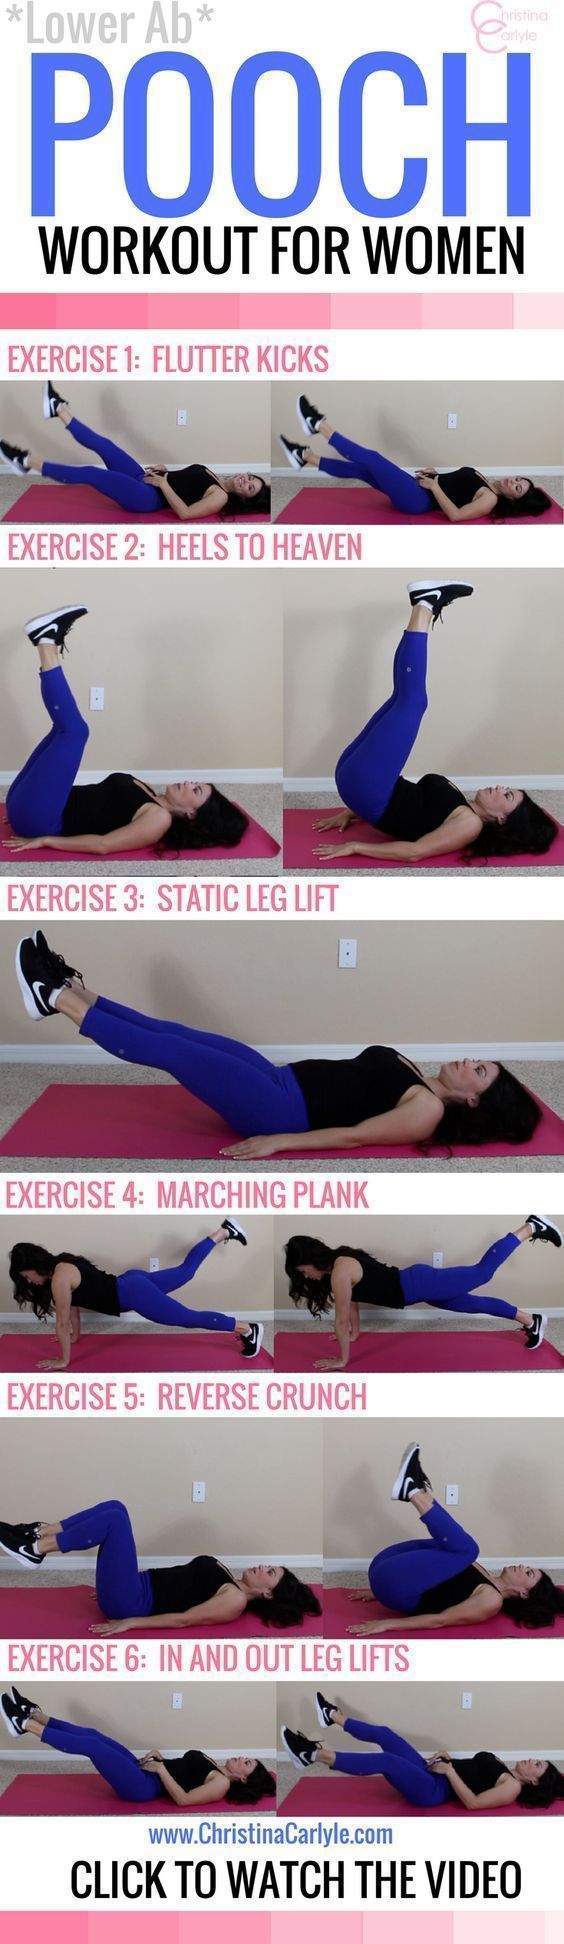 A STRONG core is ESSENTIAL for getting in shape and staying fit. This stability ball ab workout at home is PERFECT for burning